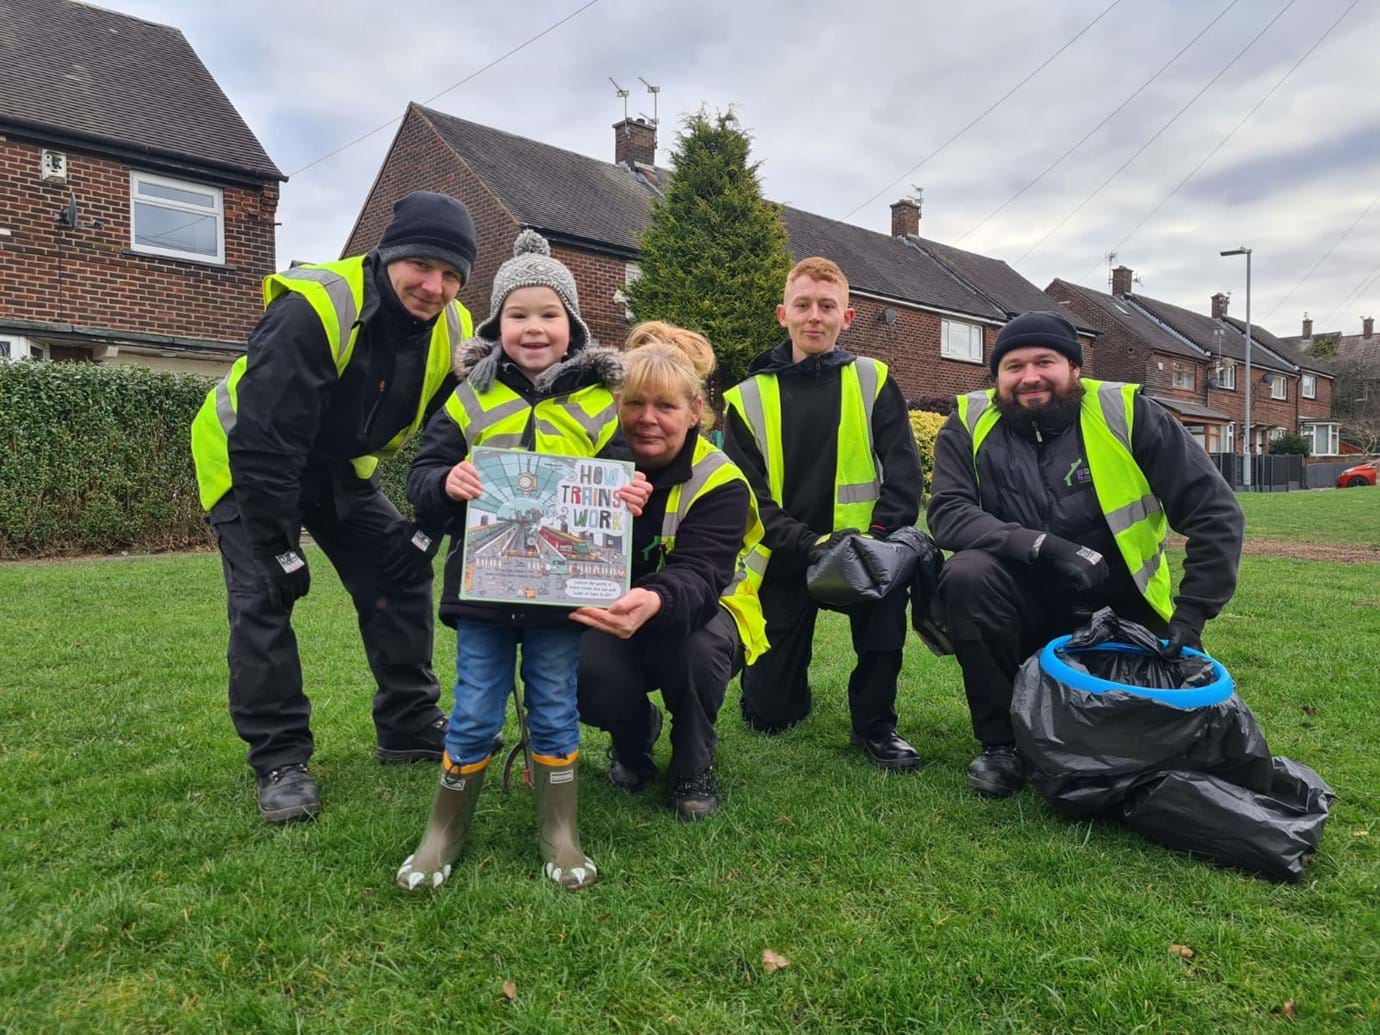 Here’s superstar, Thomas Stewart, being presented with a special prize by our Neighbourhood Care team for all his hard work litter picking in South Chadderton.